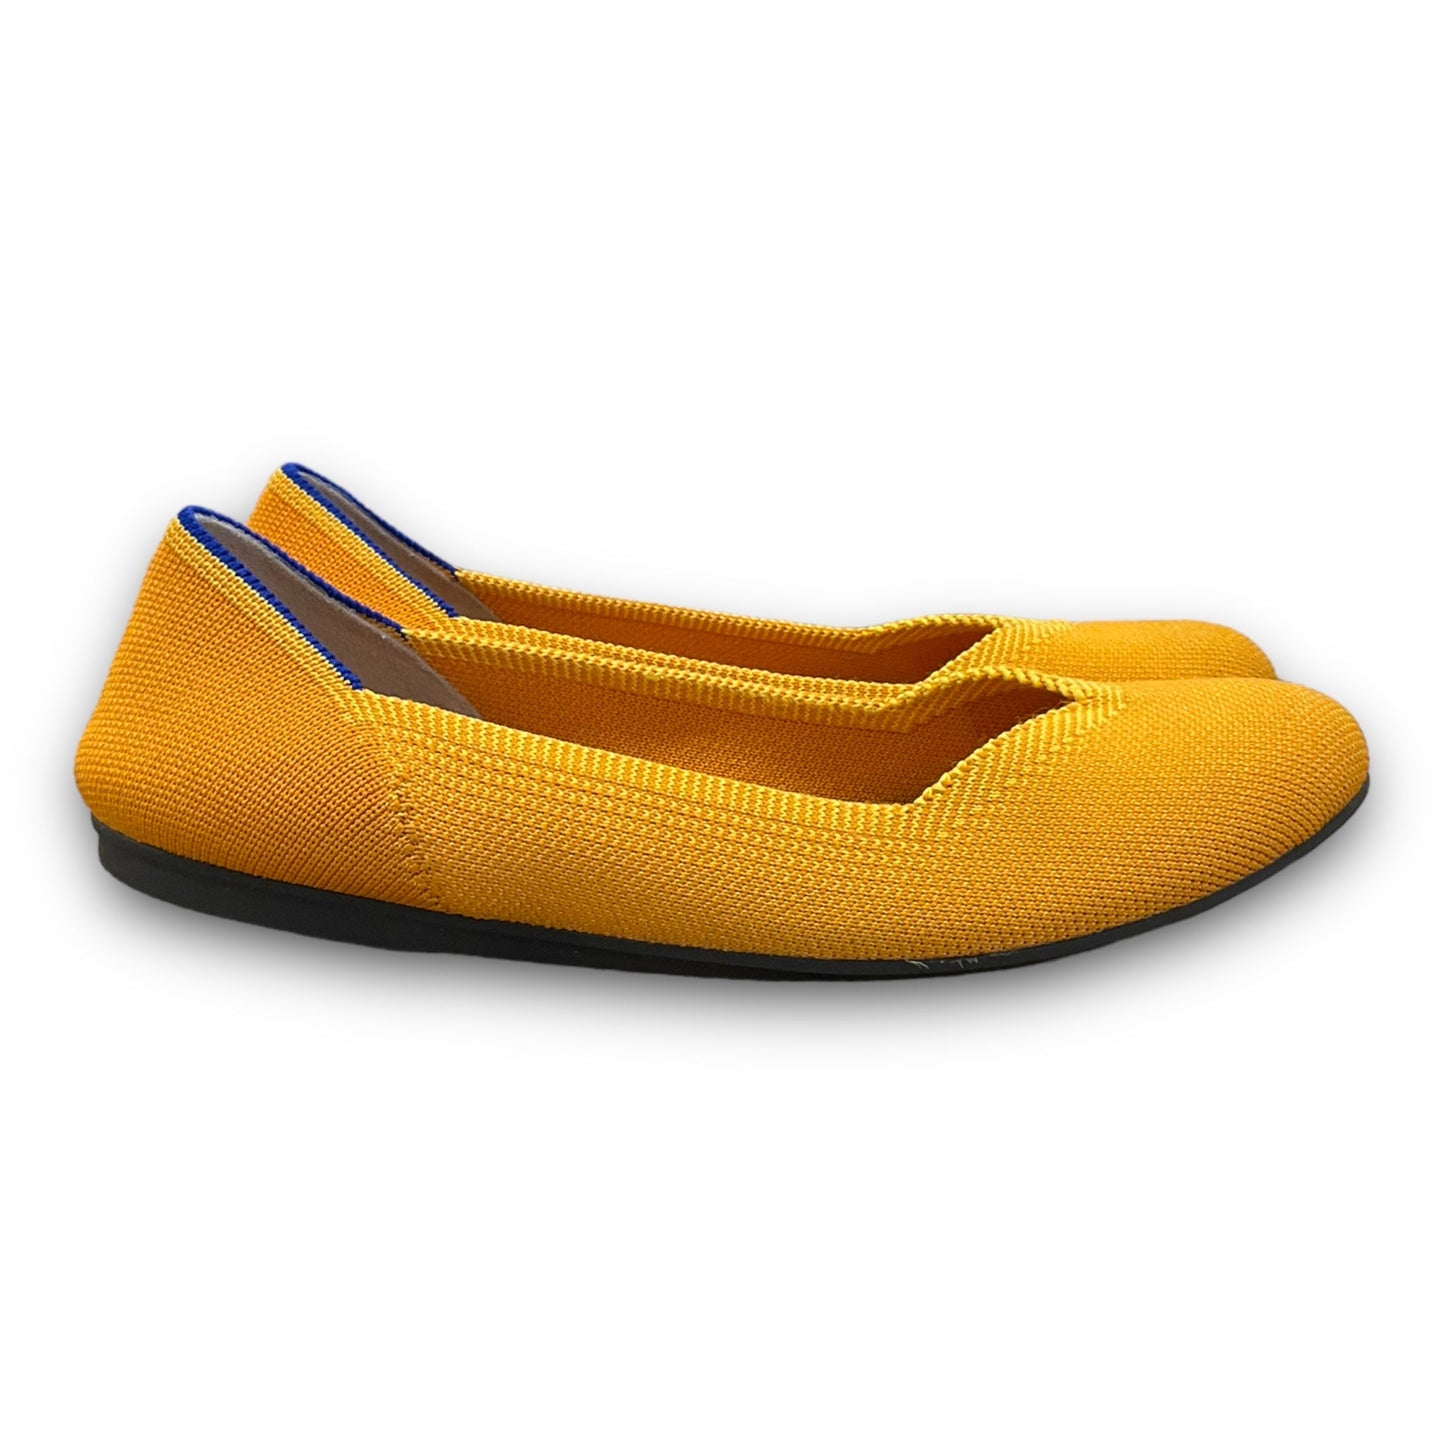 Shoes Flats By Rothys  Size: 7.5